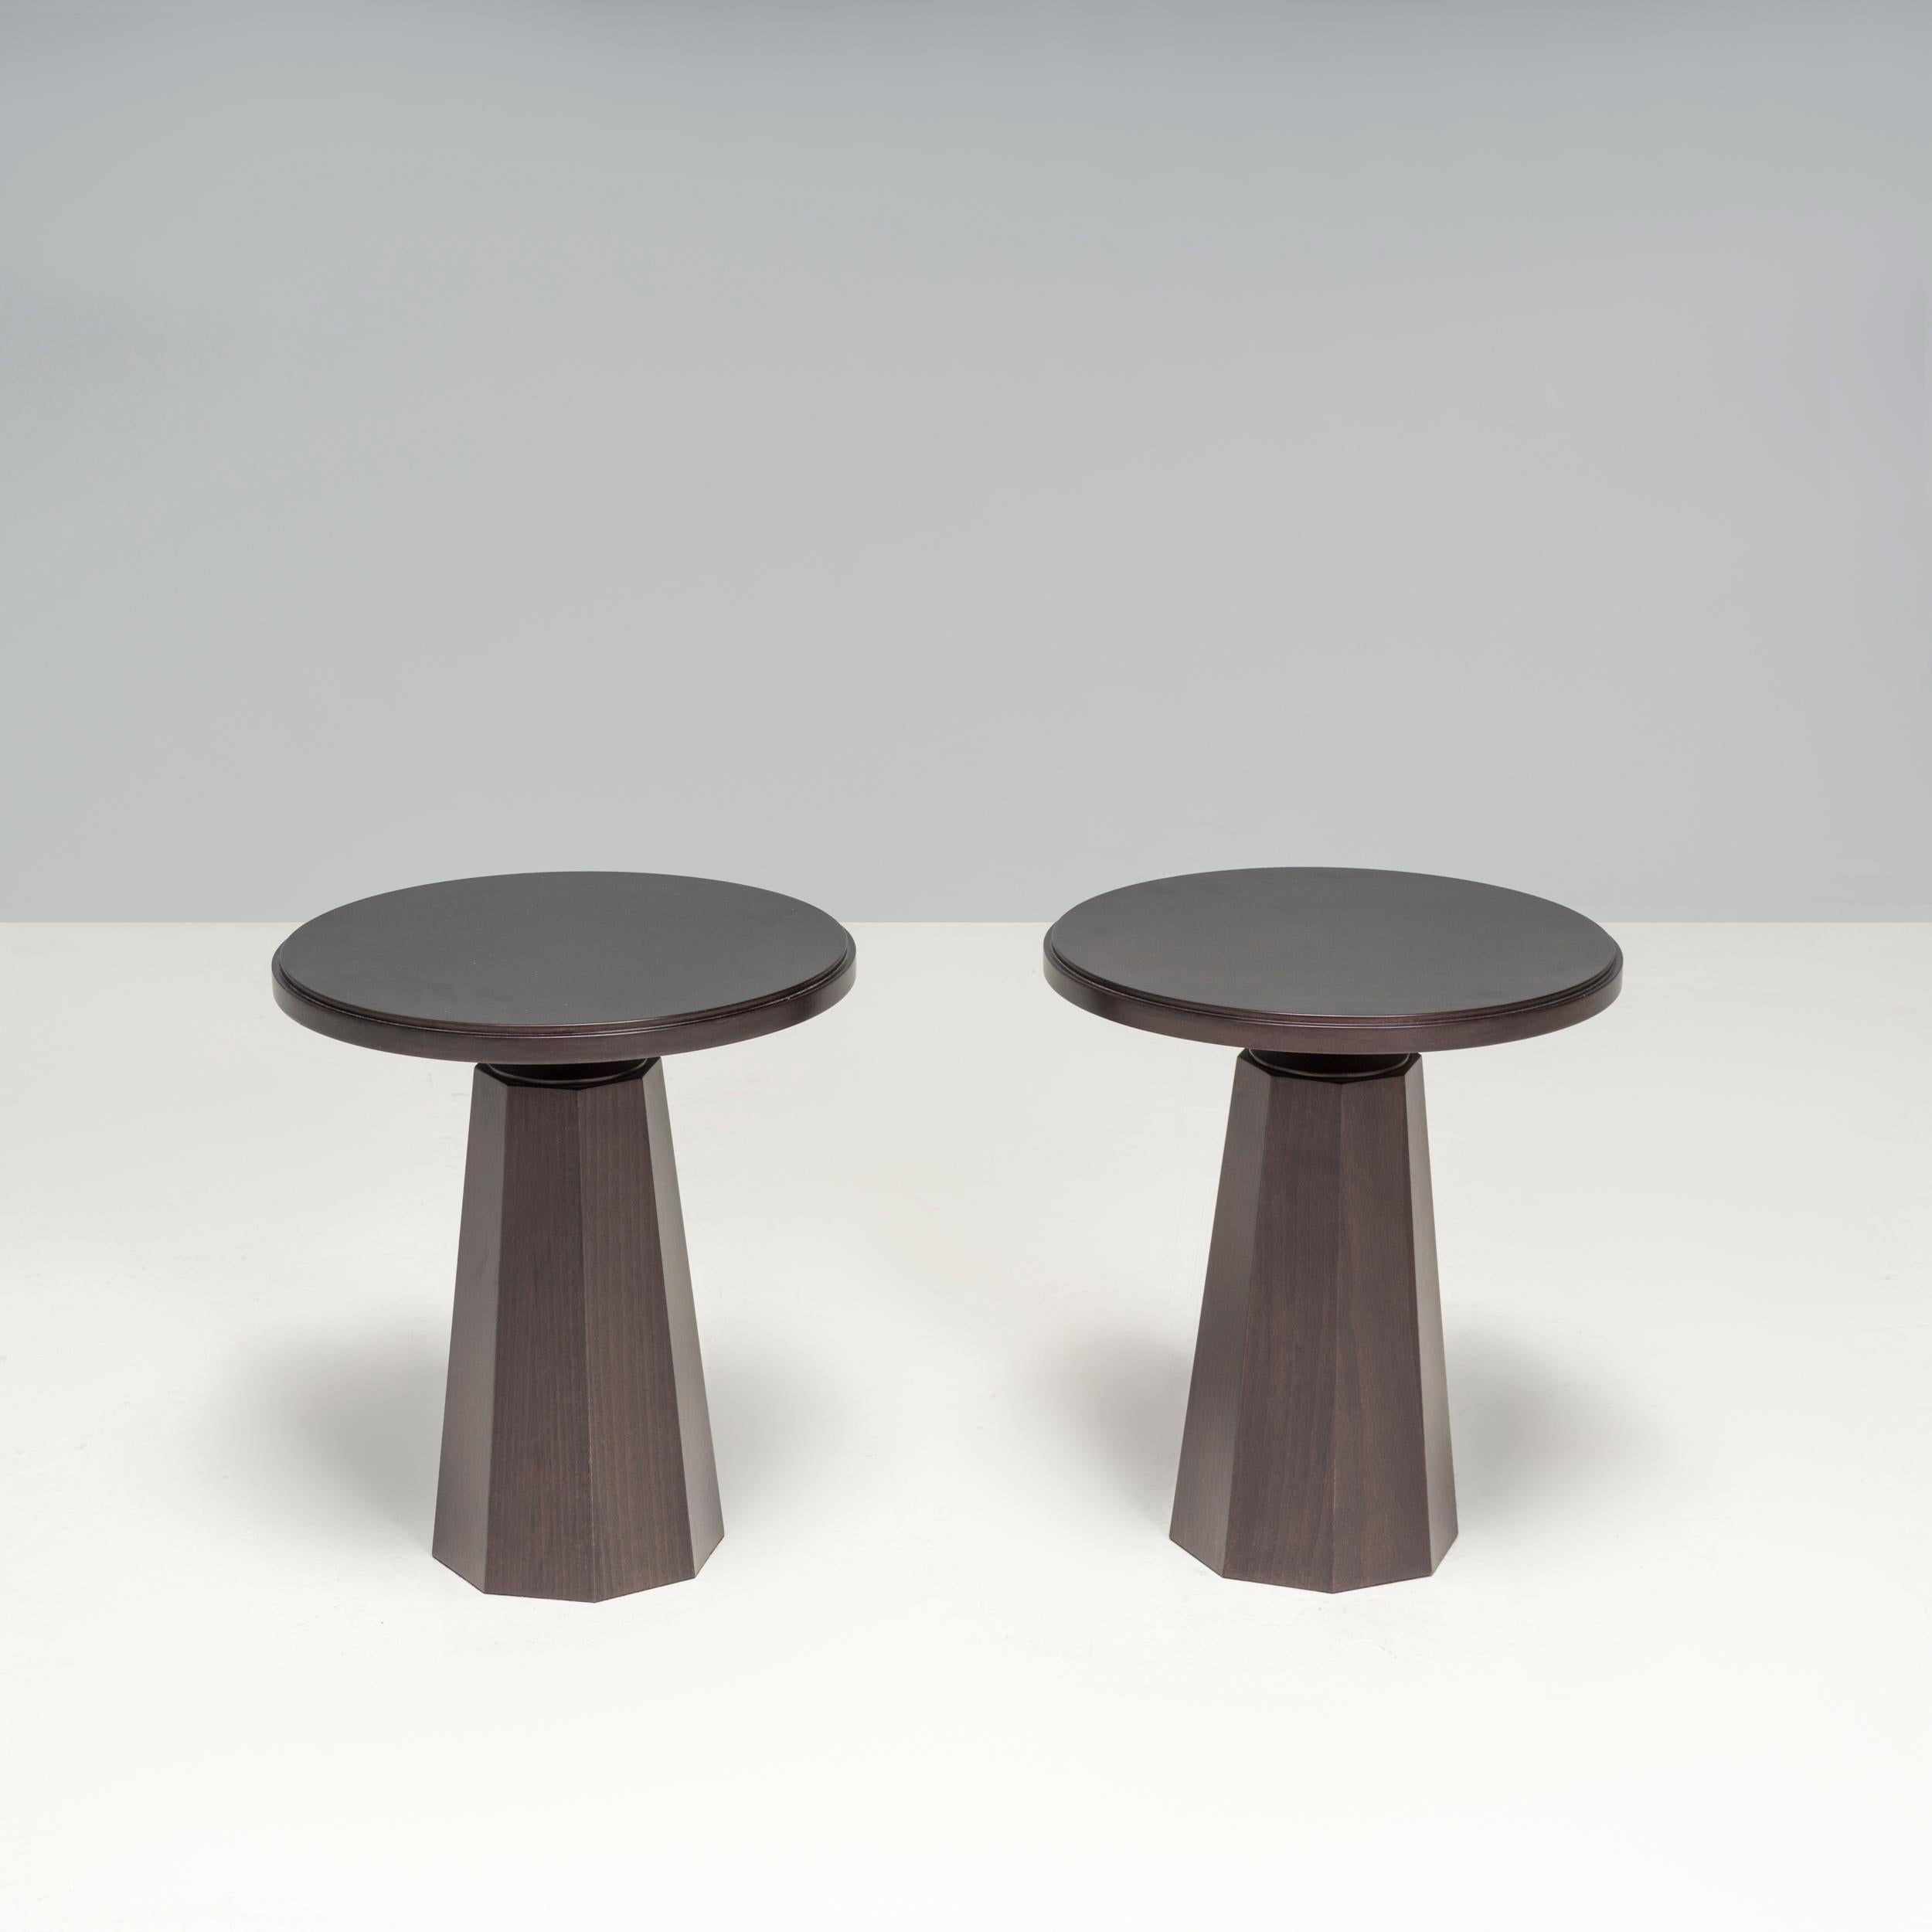  The side tables by Kelly Forslund are casually sophisticated with a modern aesthetic, these black pedestal round side tables are made from dark wood with a glossy sheen. The double set of grooves circling the table top's outer edge add definition